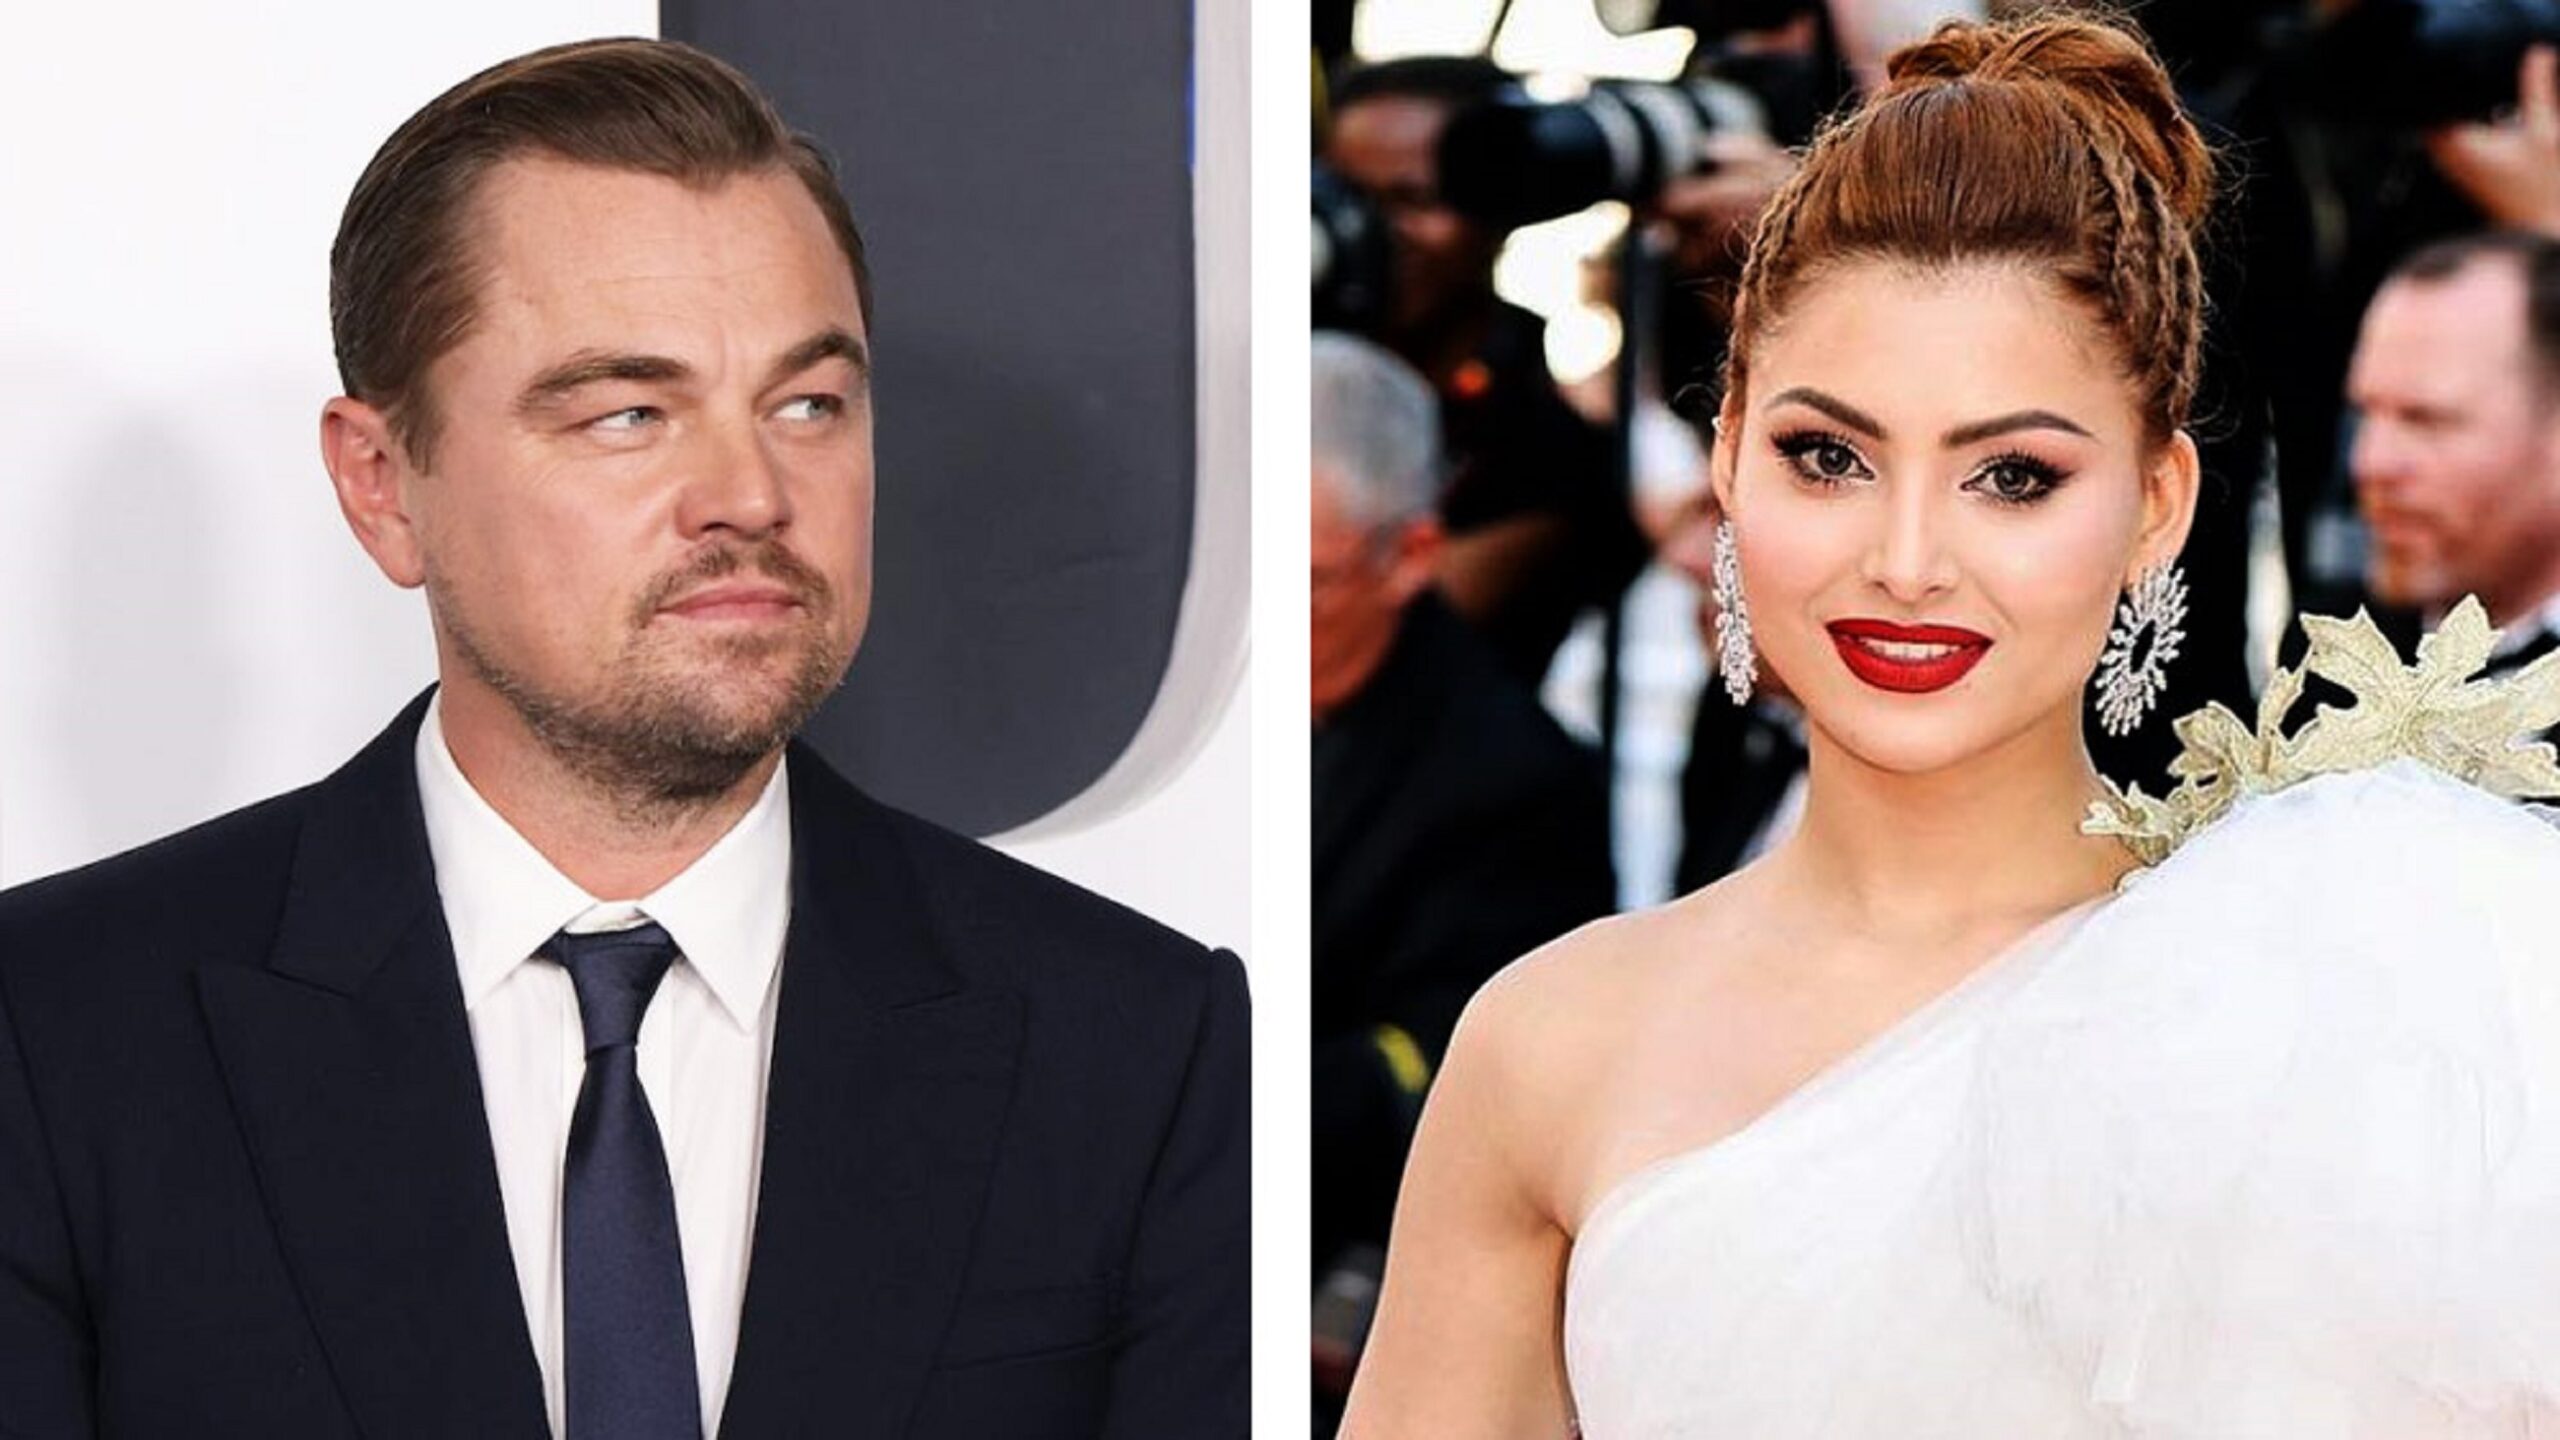 Urvashi Rautela Says Leonardo DiCaprio Praised Her As A ‘Talented Actress’ At Cannes, “I Was Blushing”